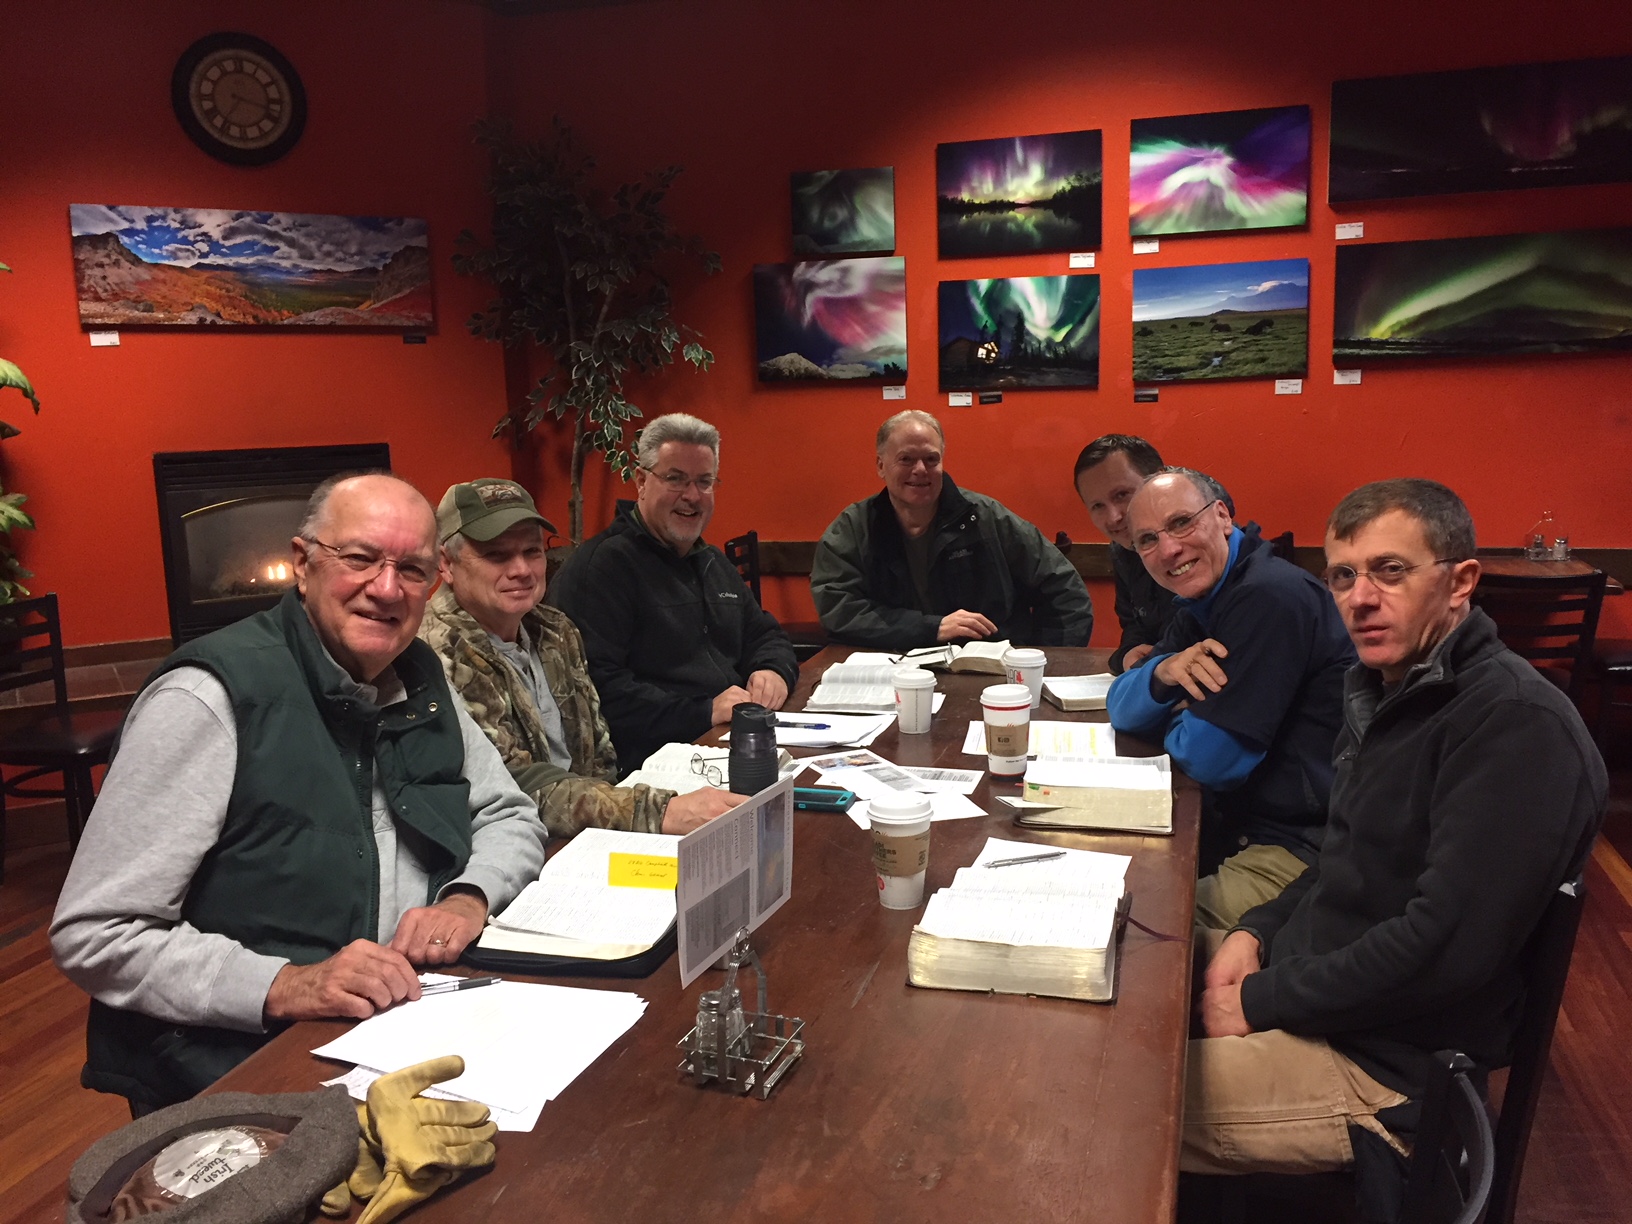 Men's Bible study in a cafe